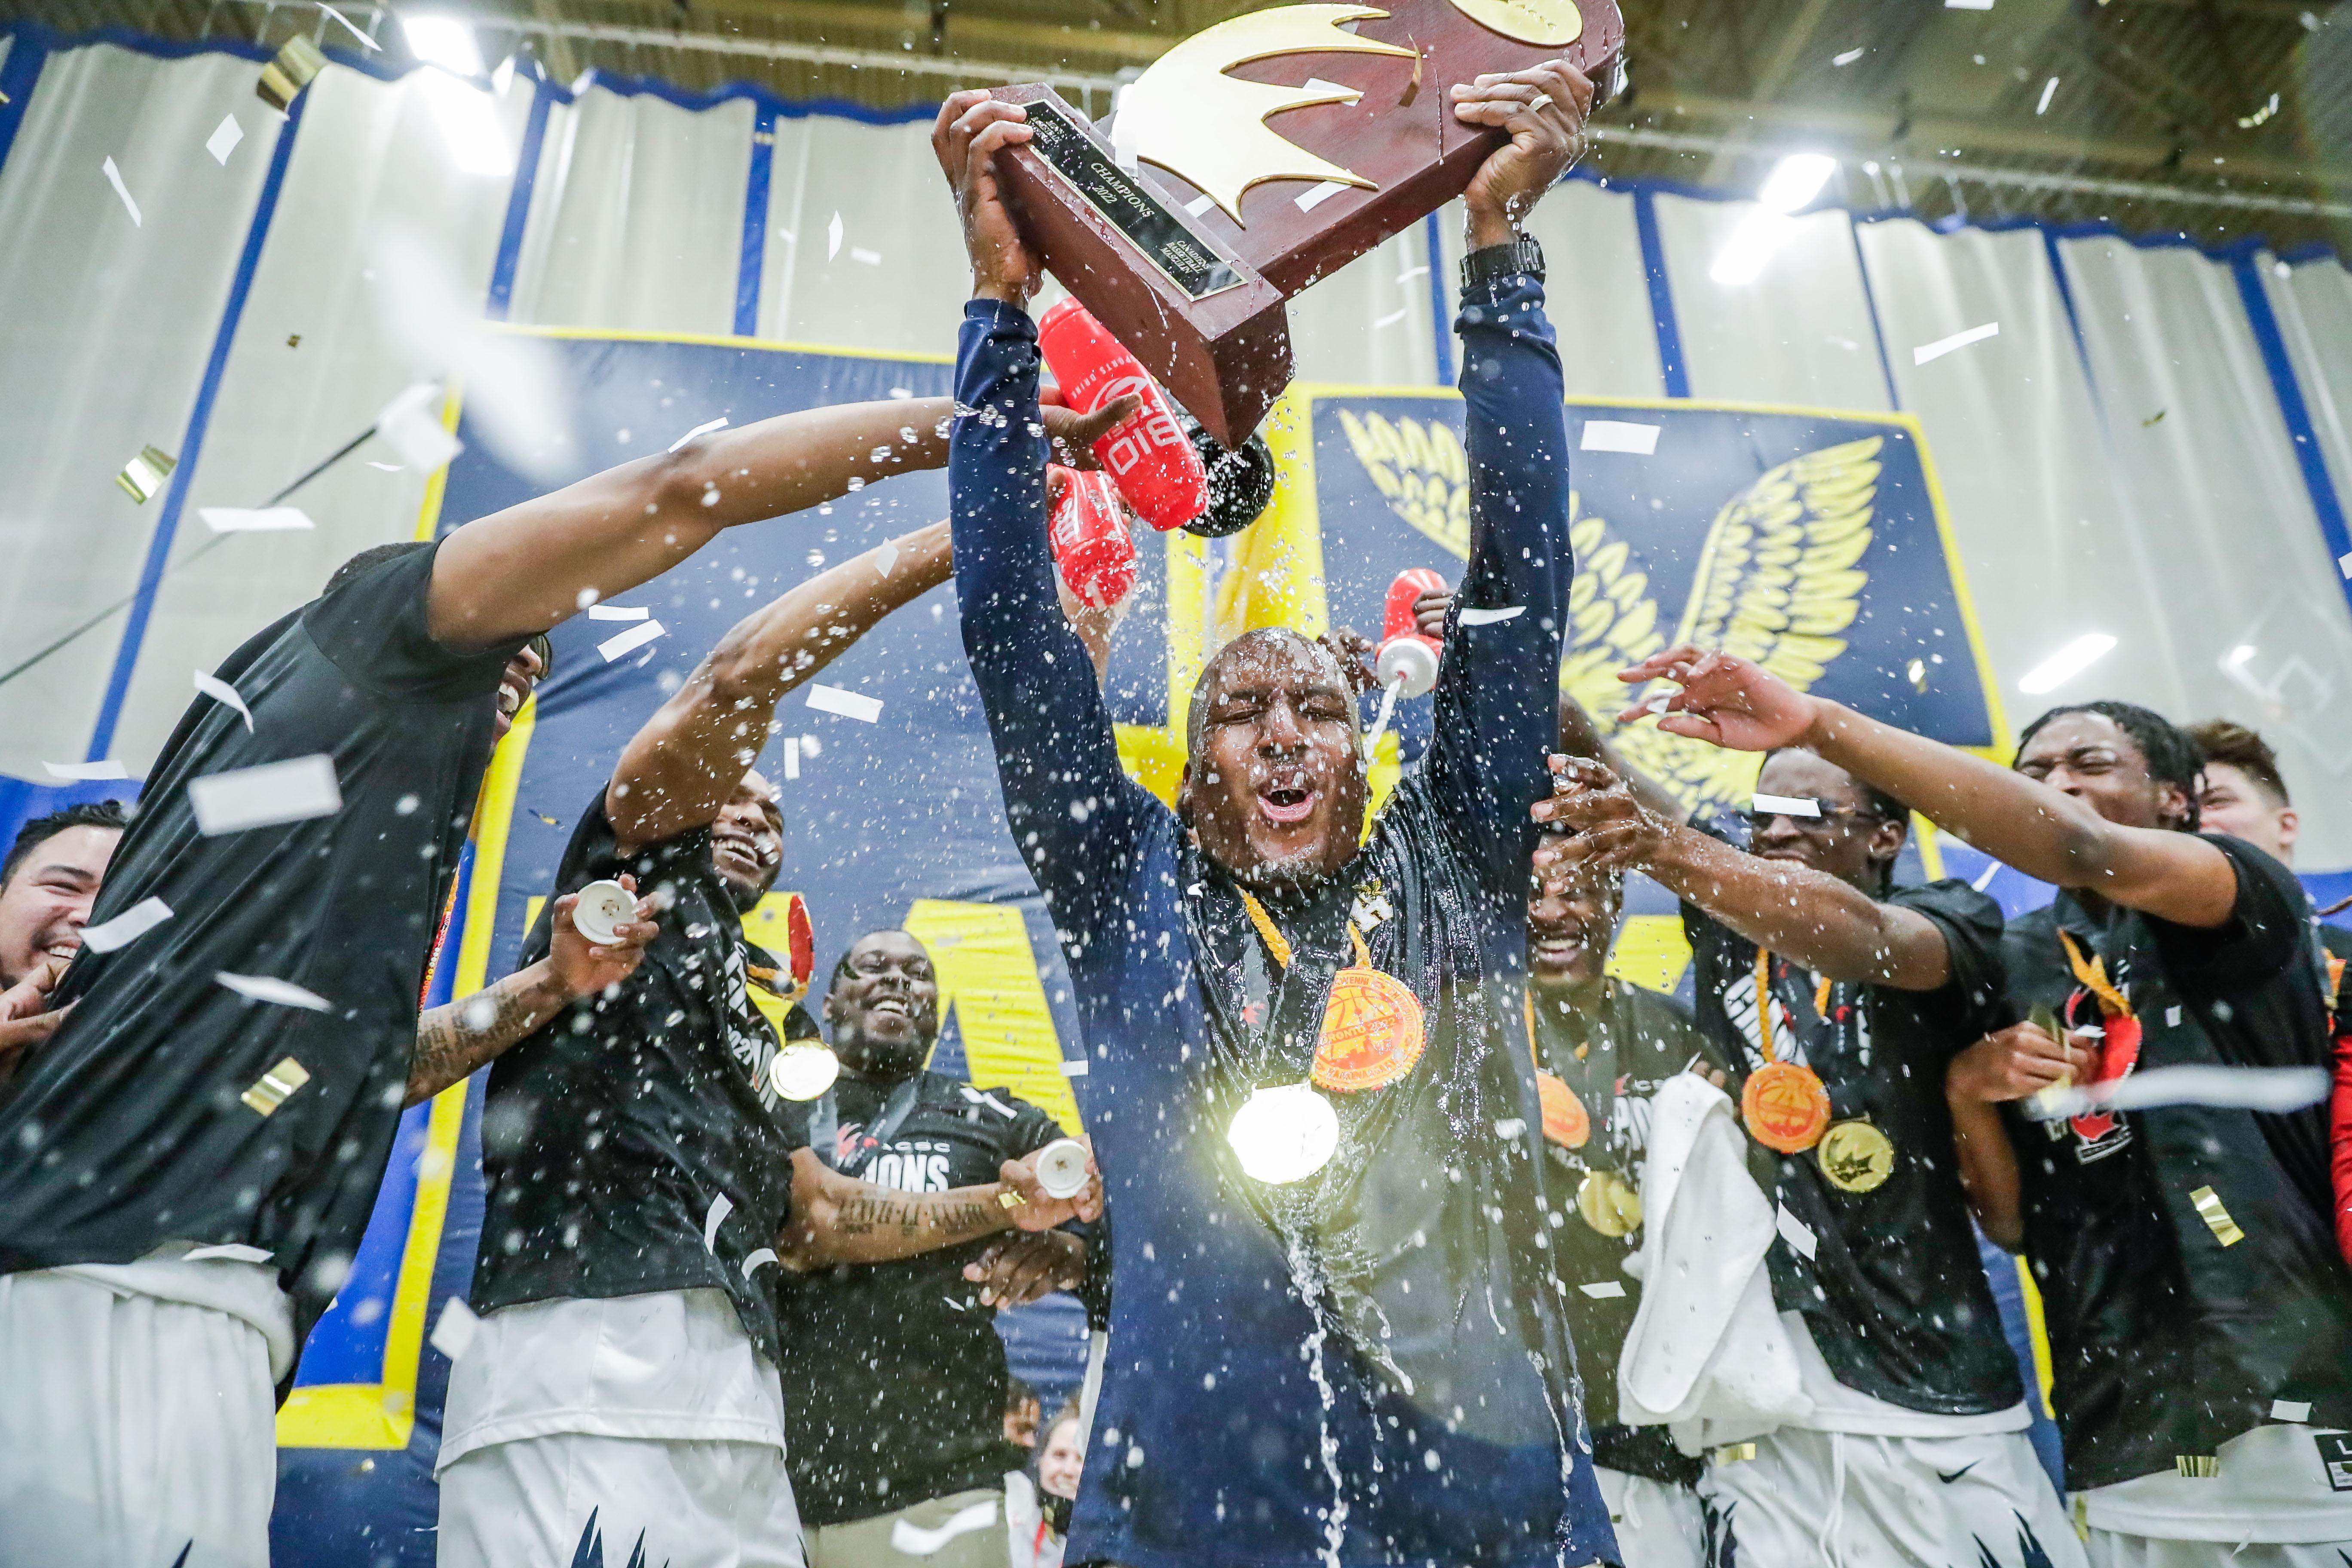 Athletes cheer and spray a person with water as that person lifts a trophy above their head.